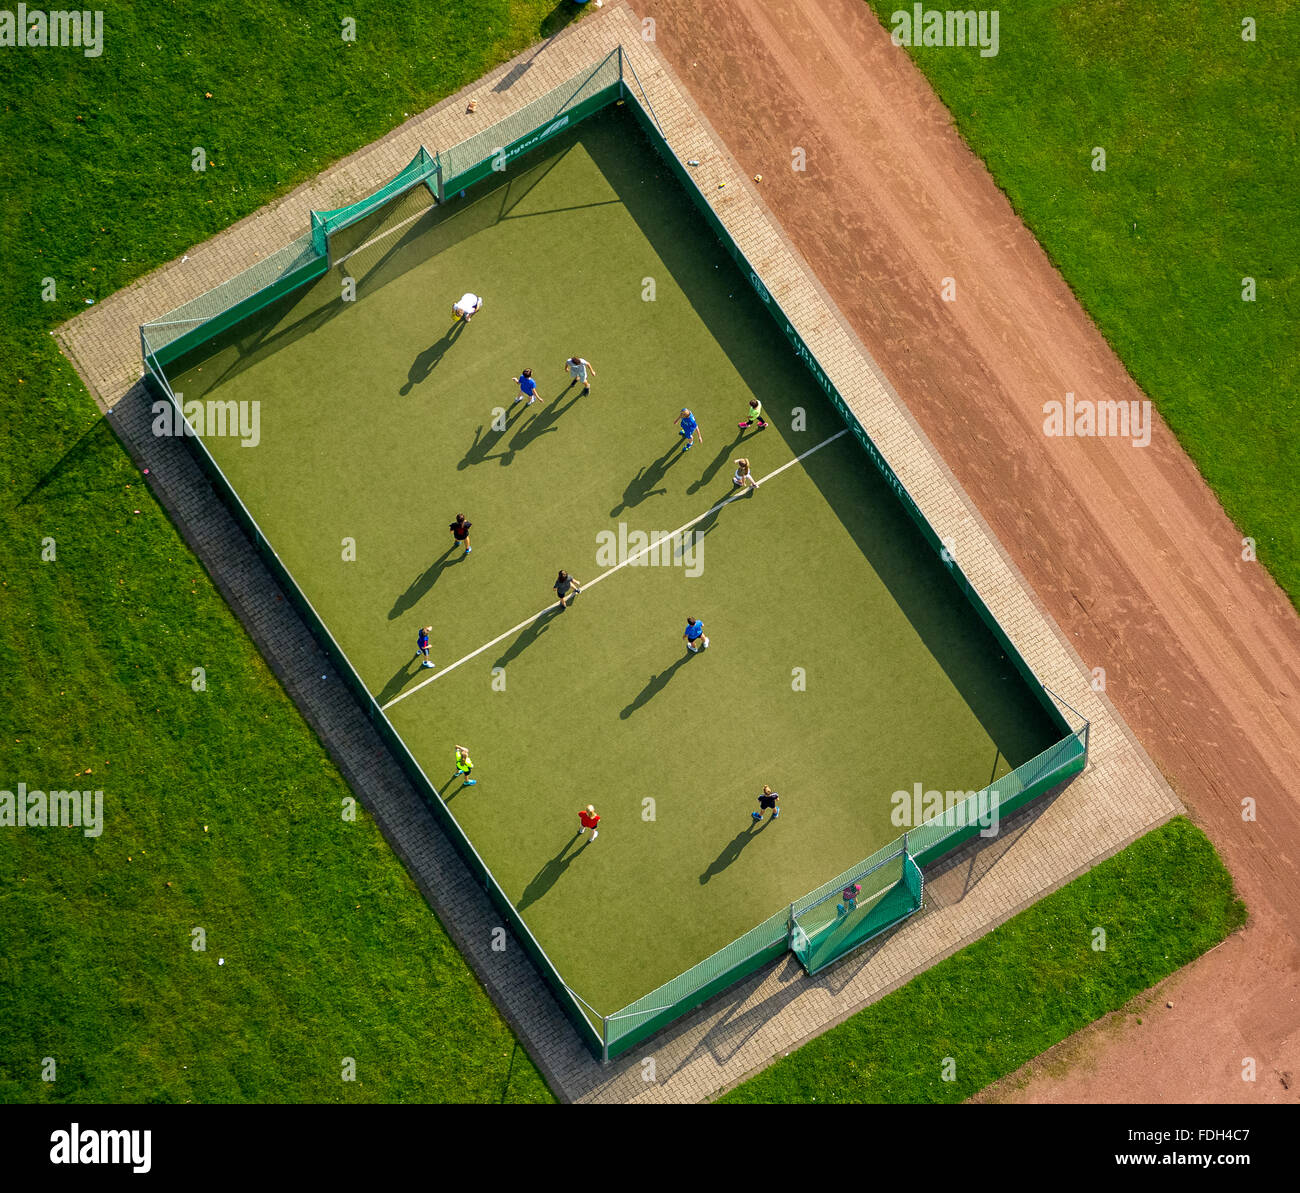 Aerial view, football is the future, offense, football field on crickets, Dinslaken, Ruhr area, Lower Rhine, Stock Photo